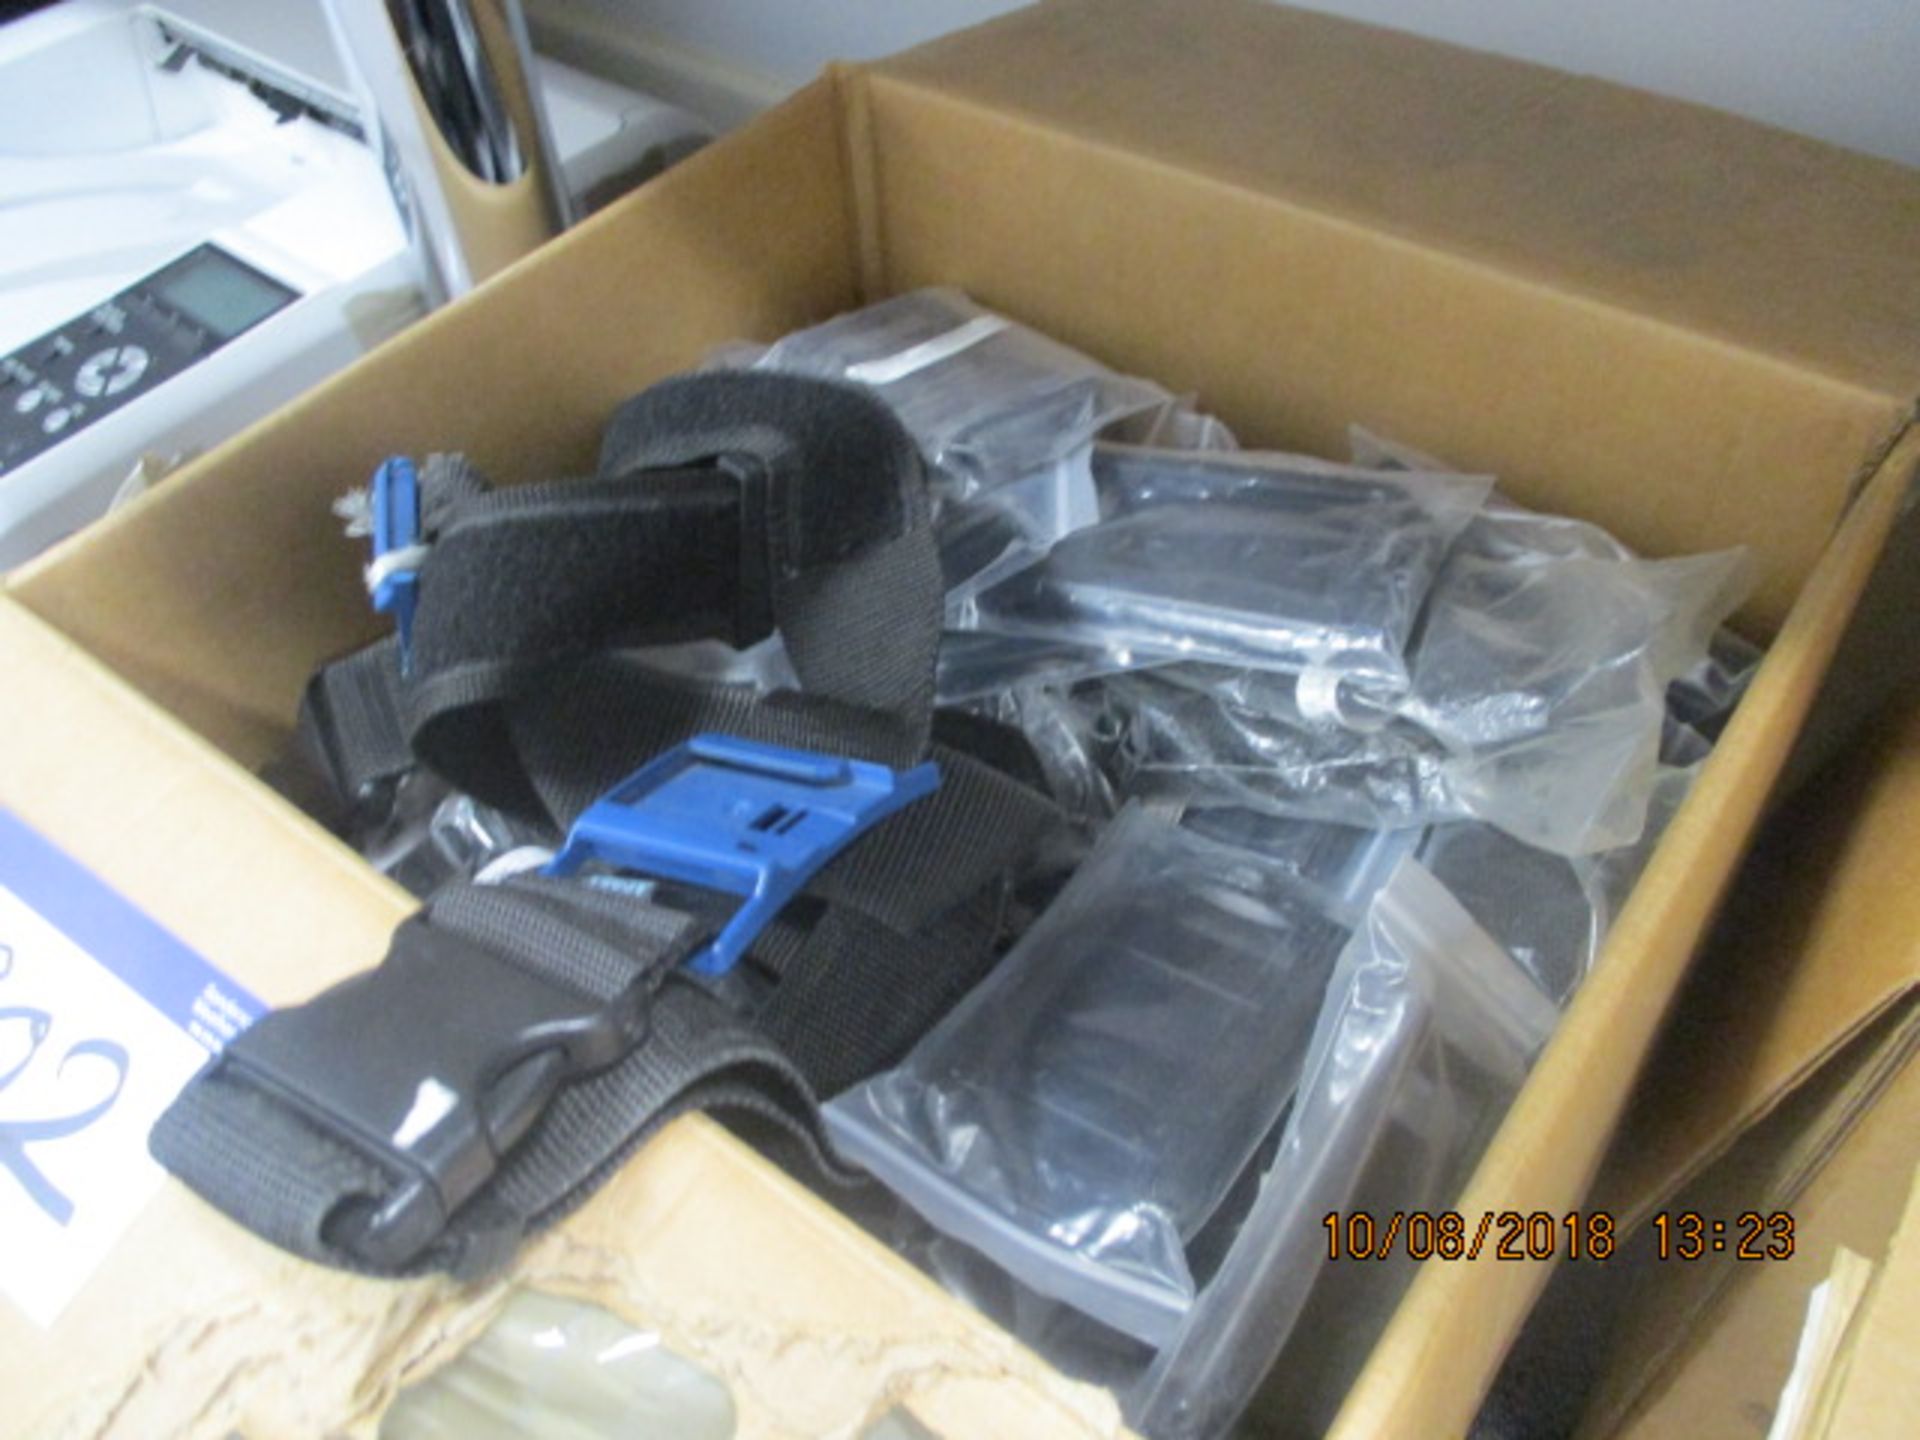 Assorted Assembly Scanner Holsters, as set out in